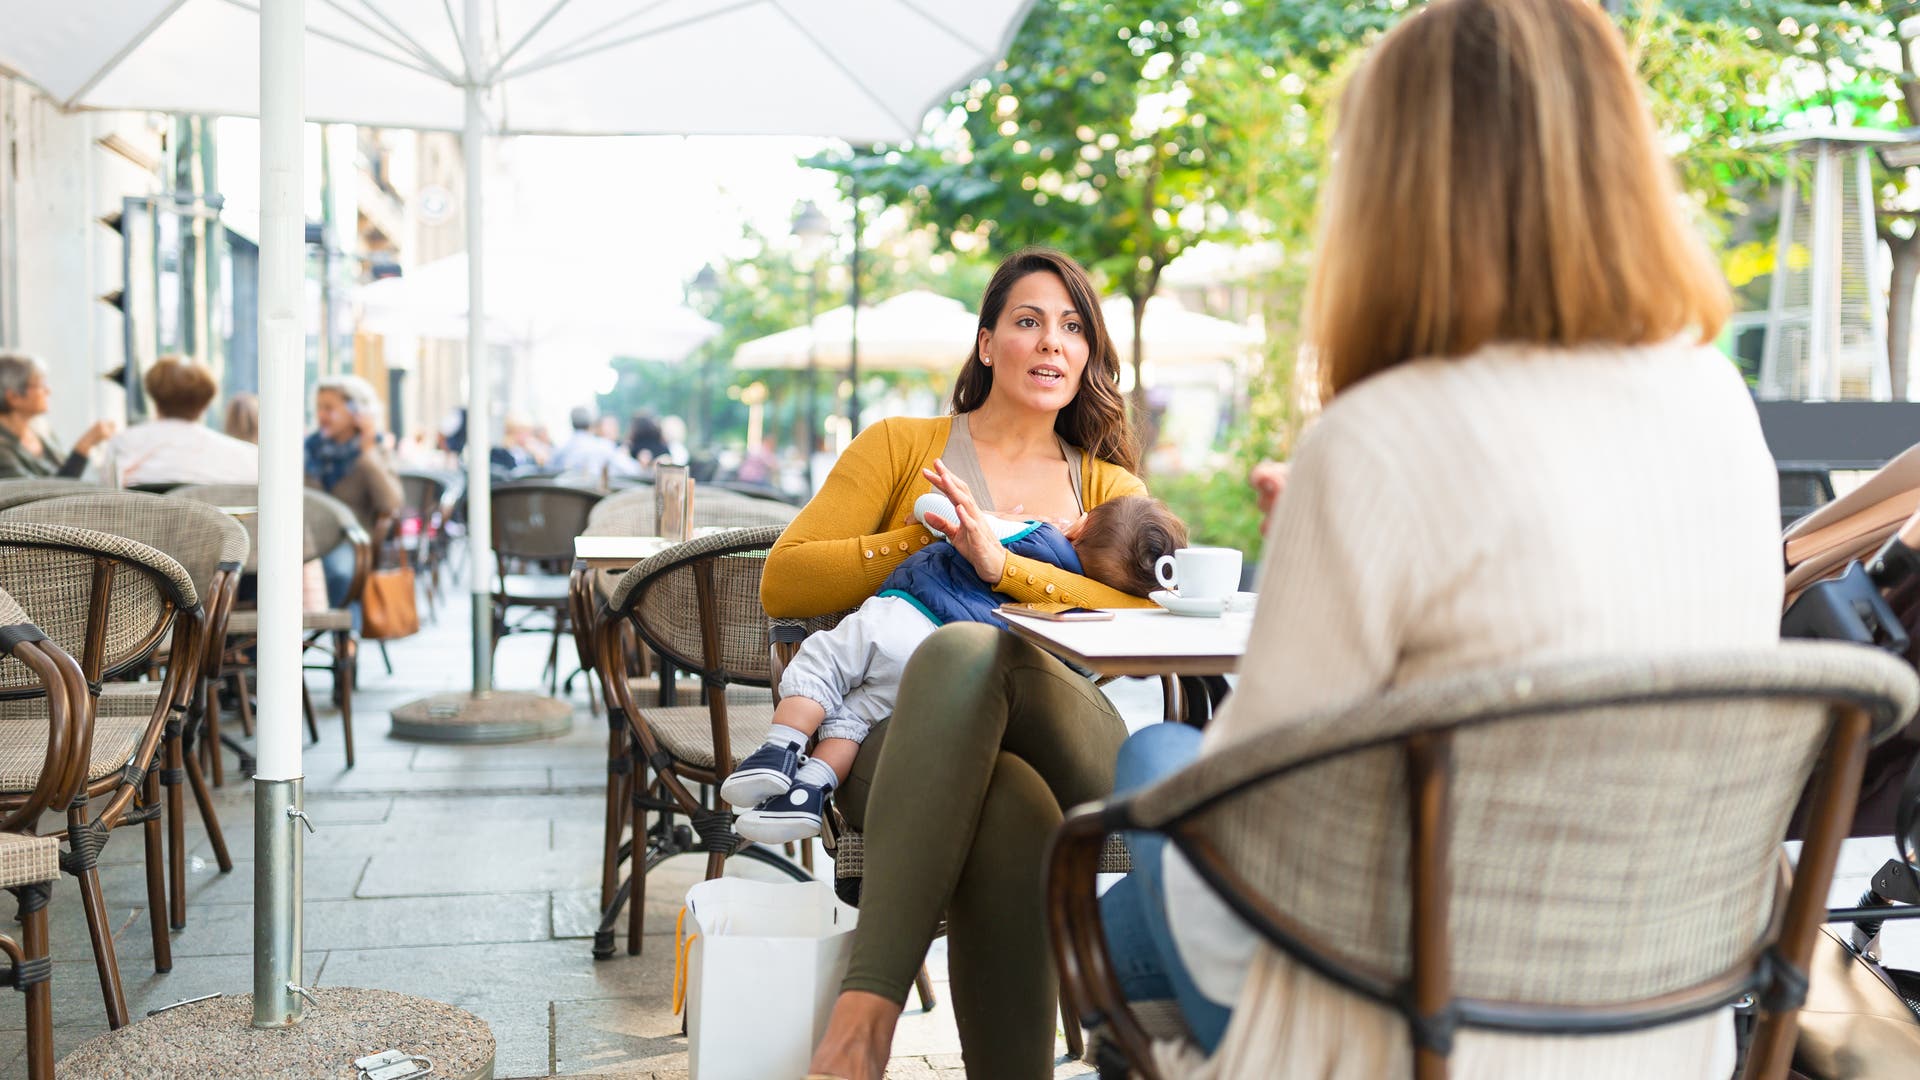 Breastfeeding in Public: Uncomfortable or Natural?